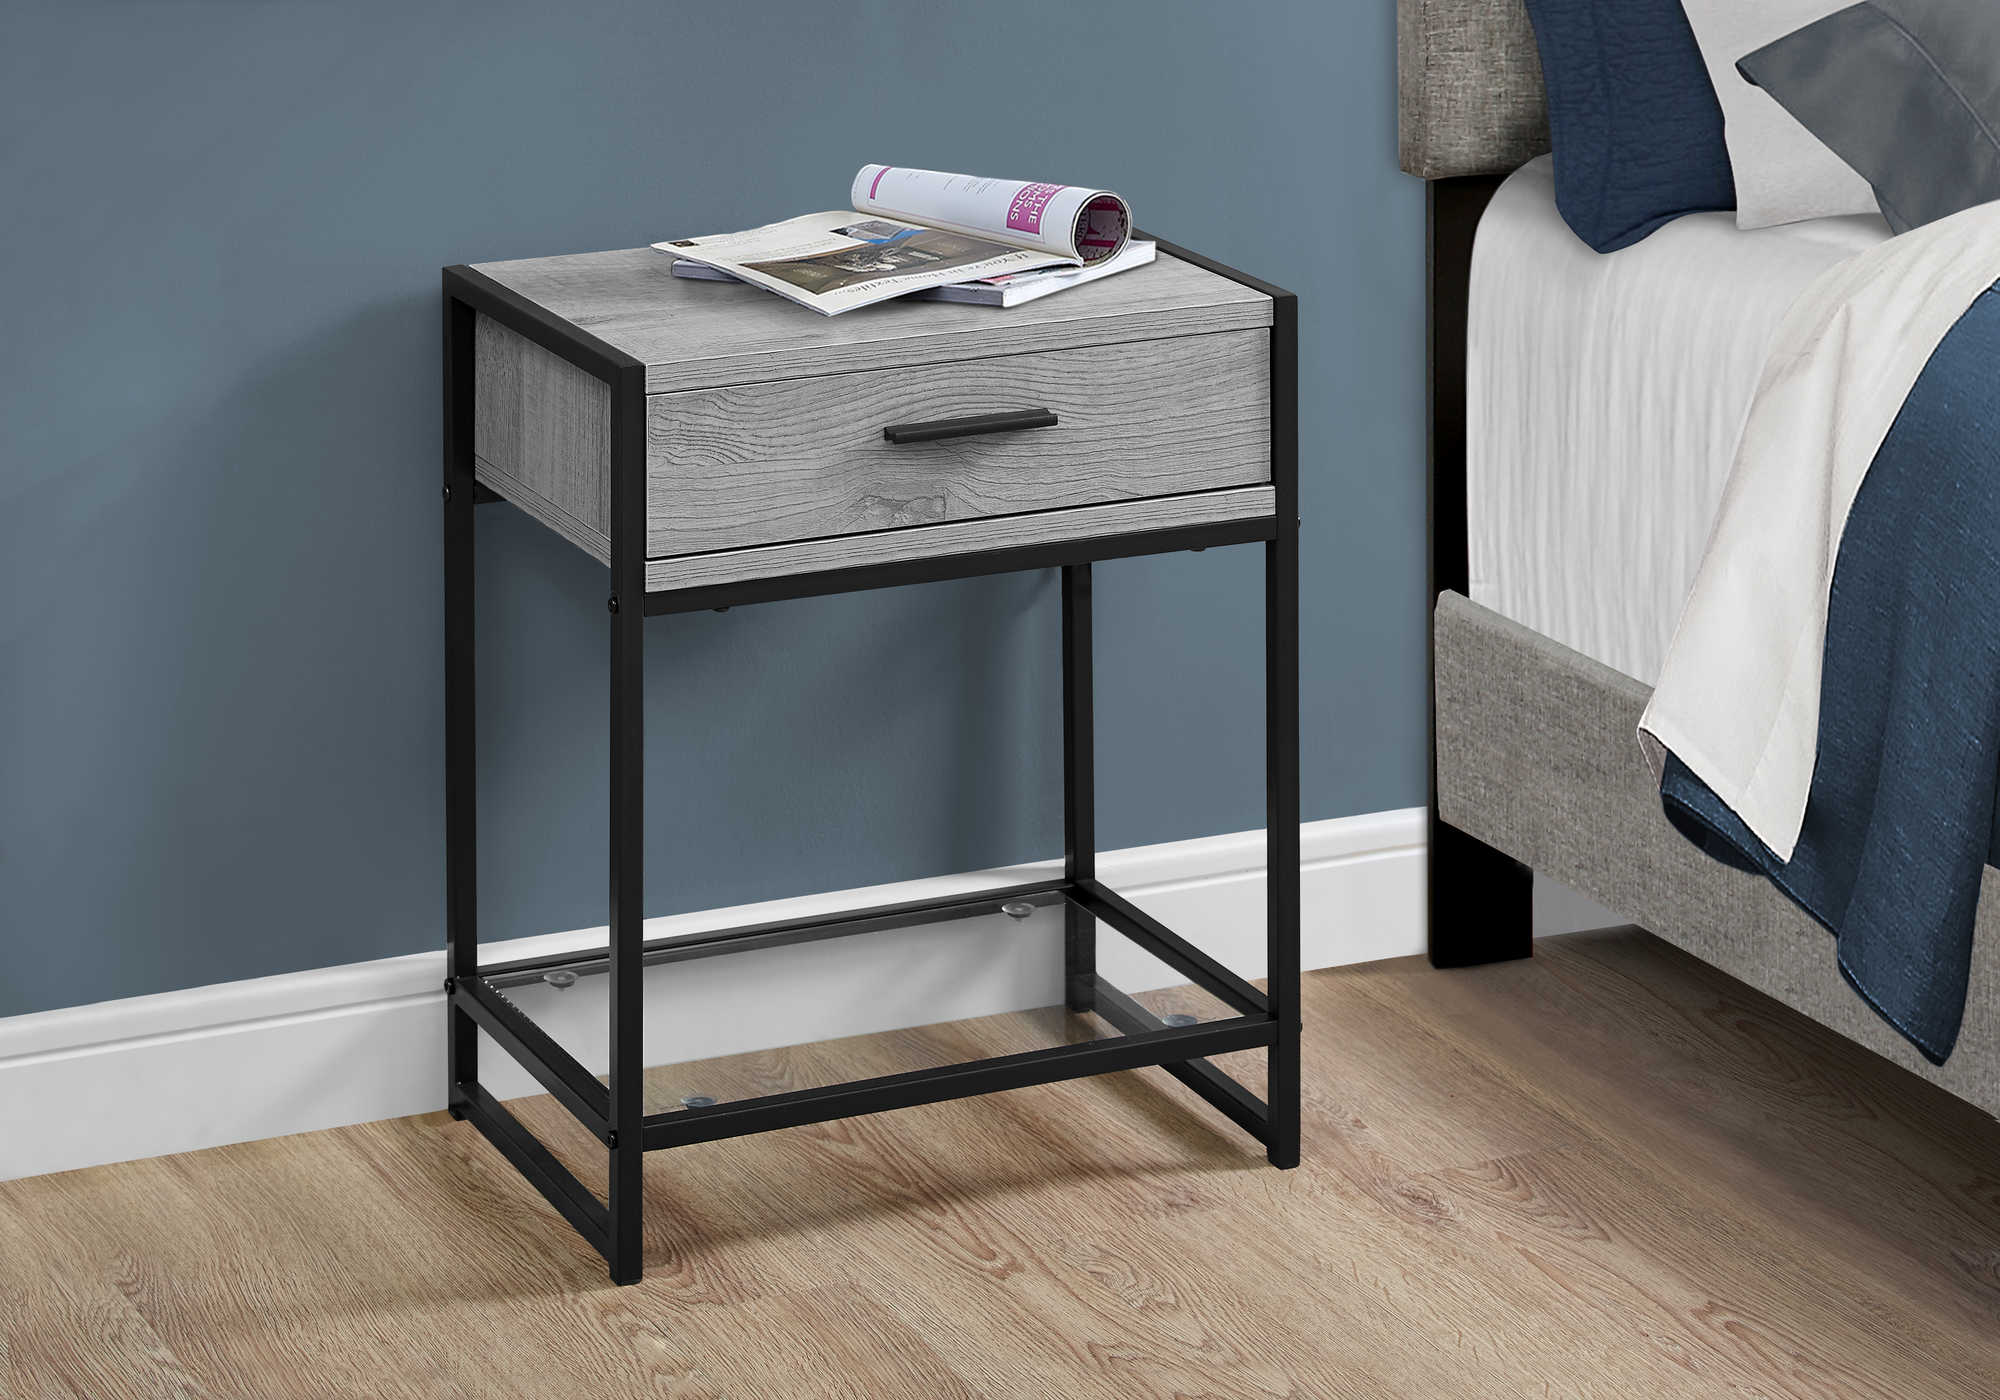 NIGHT STAND - 22"H / GREY / BLACK METAL / TEMPERED GLASS